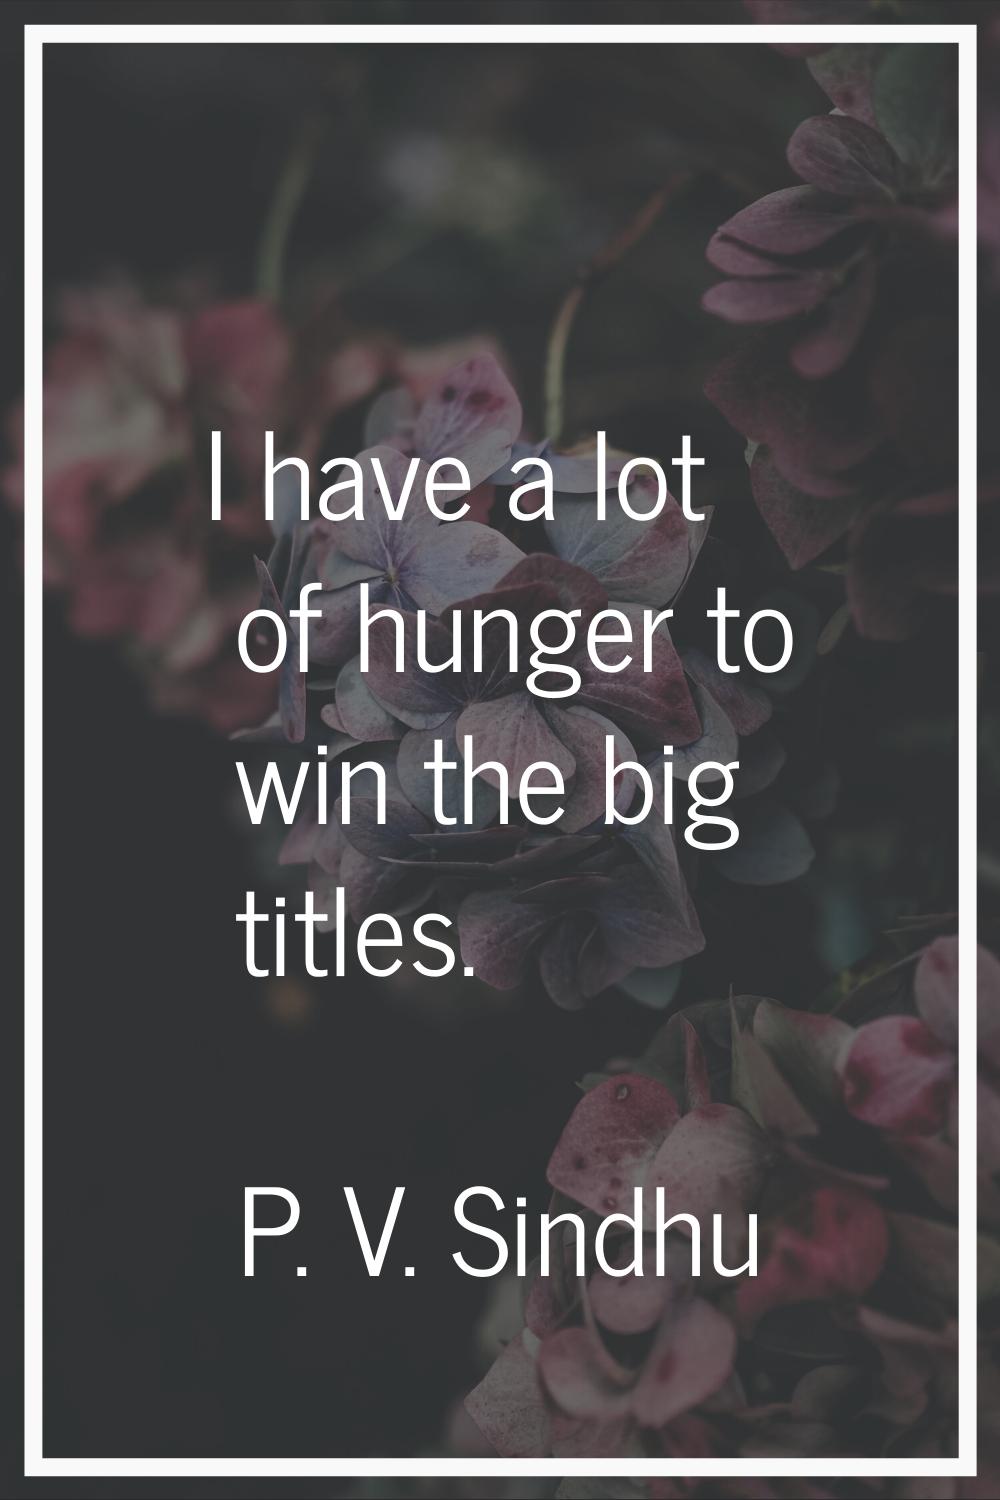 I have a lot of hunger to win the big titles.